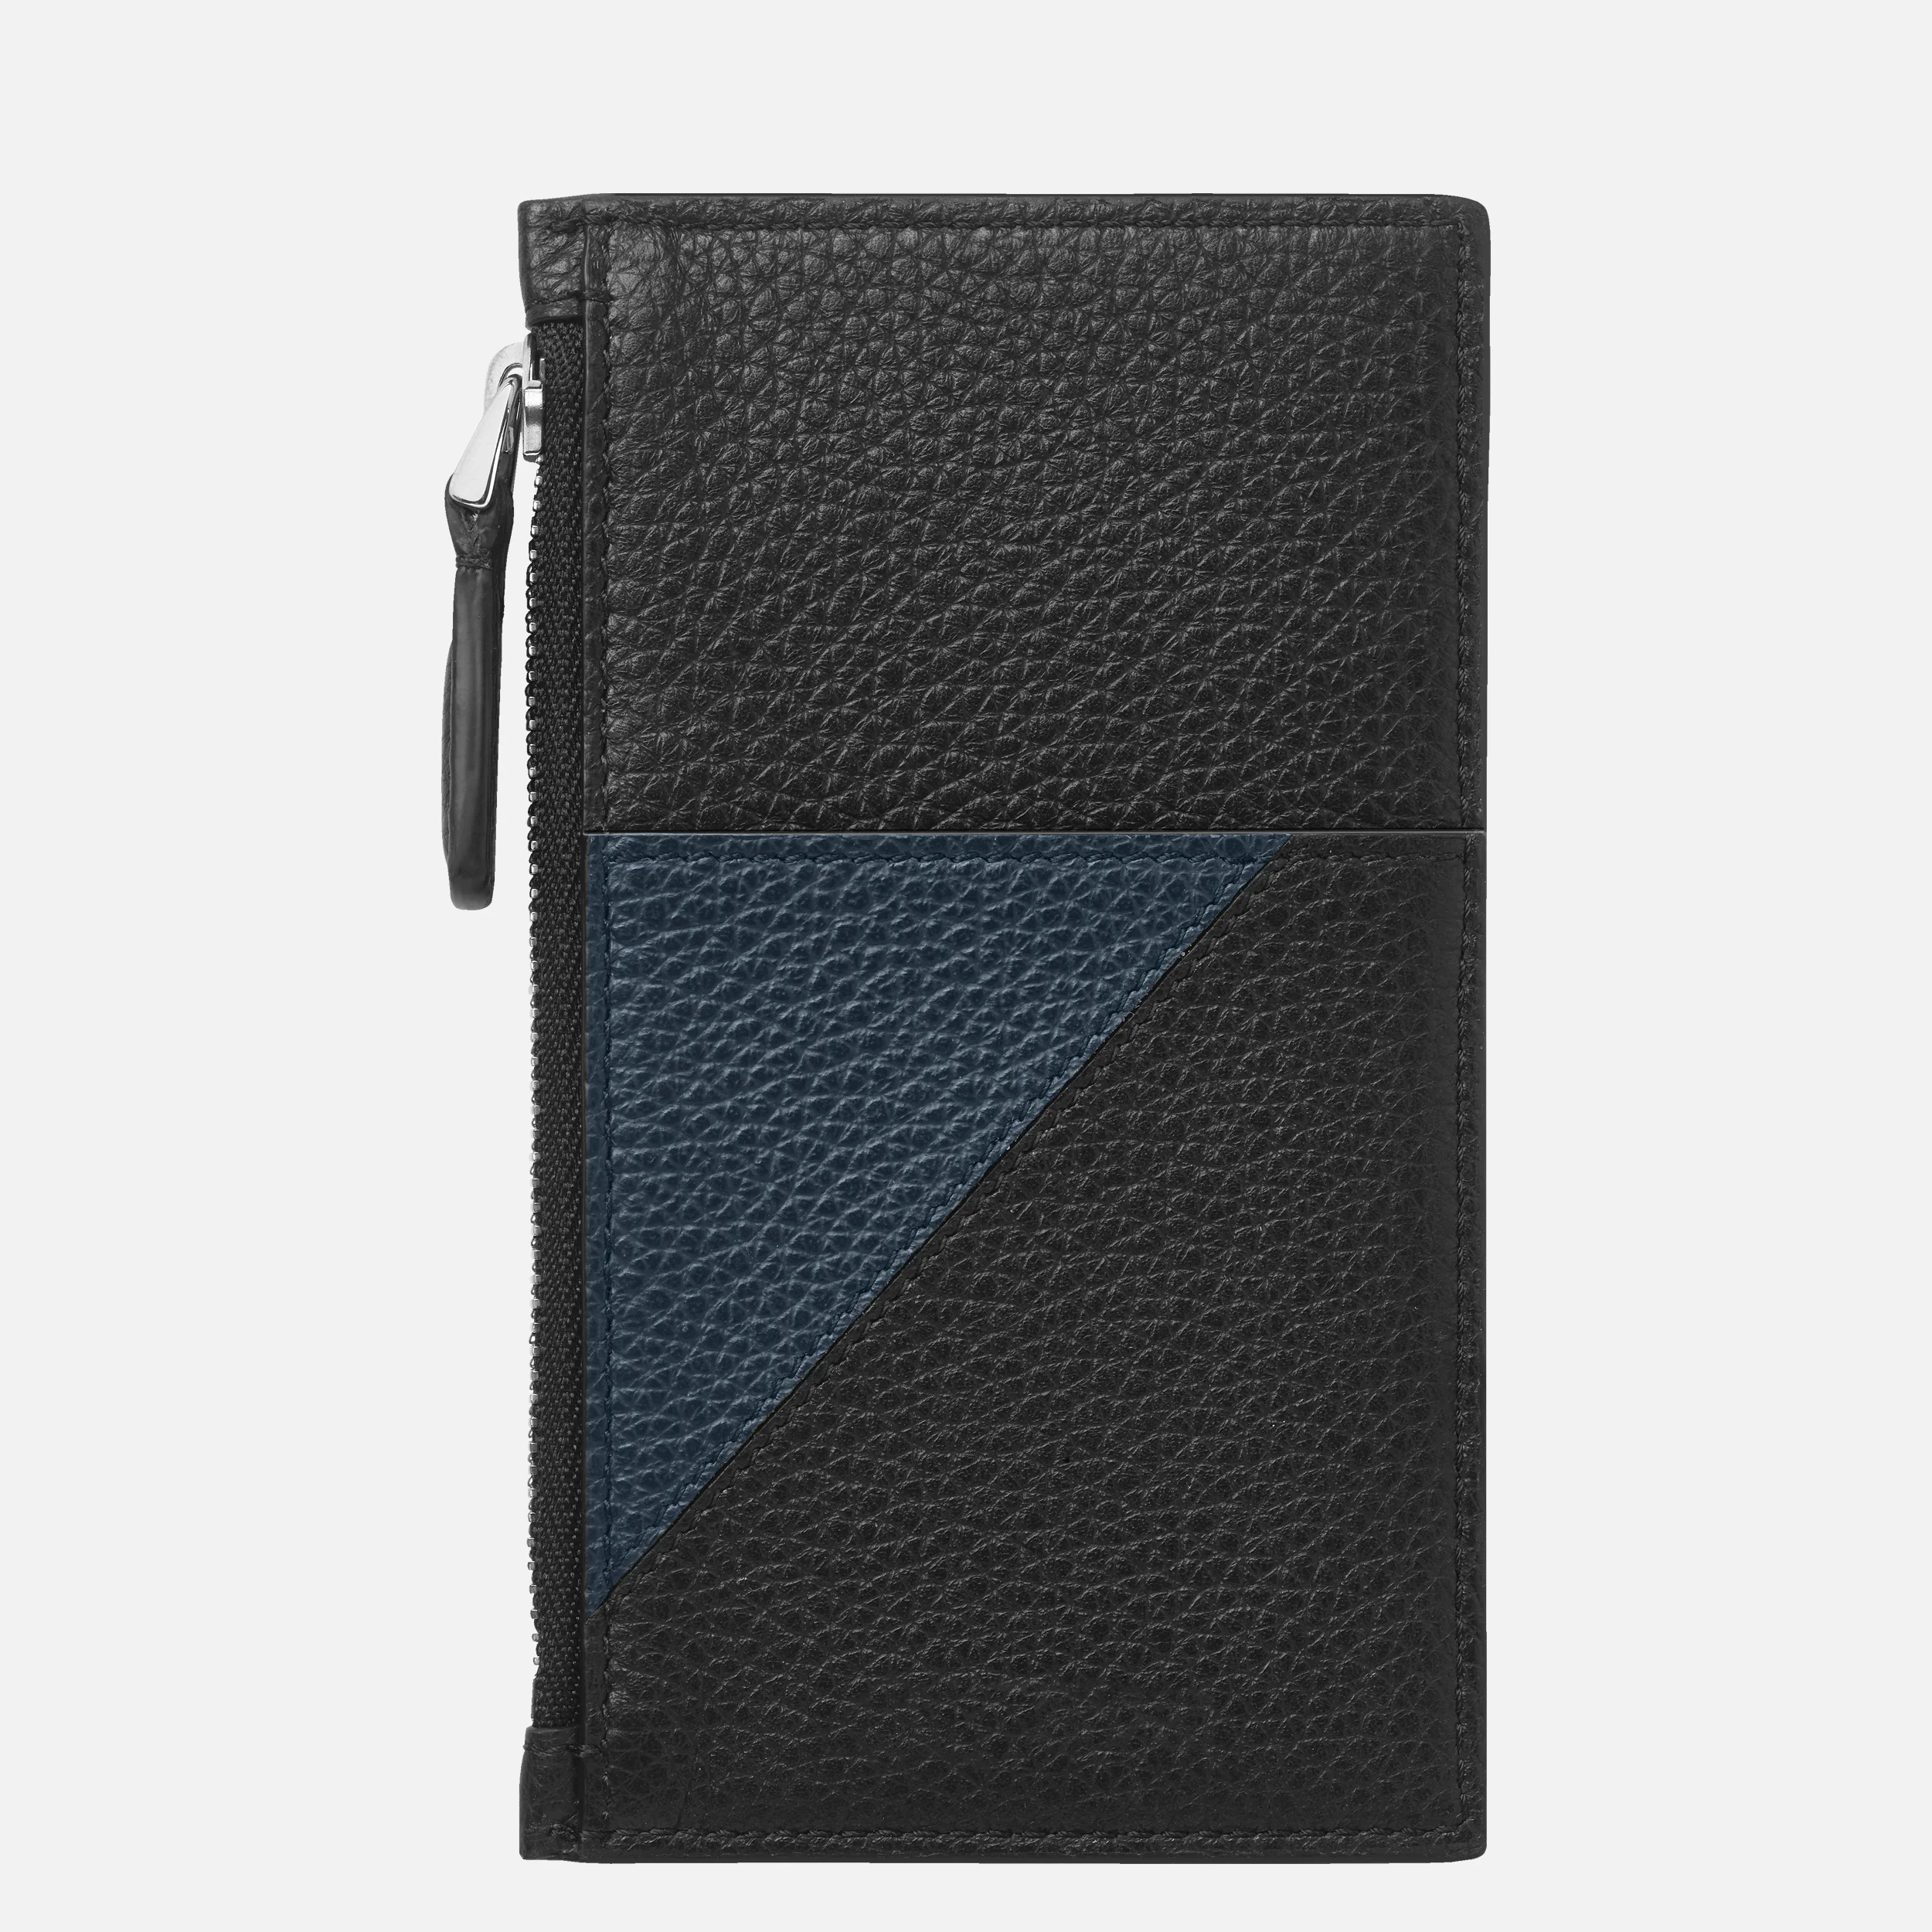 Montblanc Meisterstuck Soft Grain Geometry Pocket 5cc with Zip Black/Blue - Pencraft the boutique